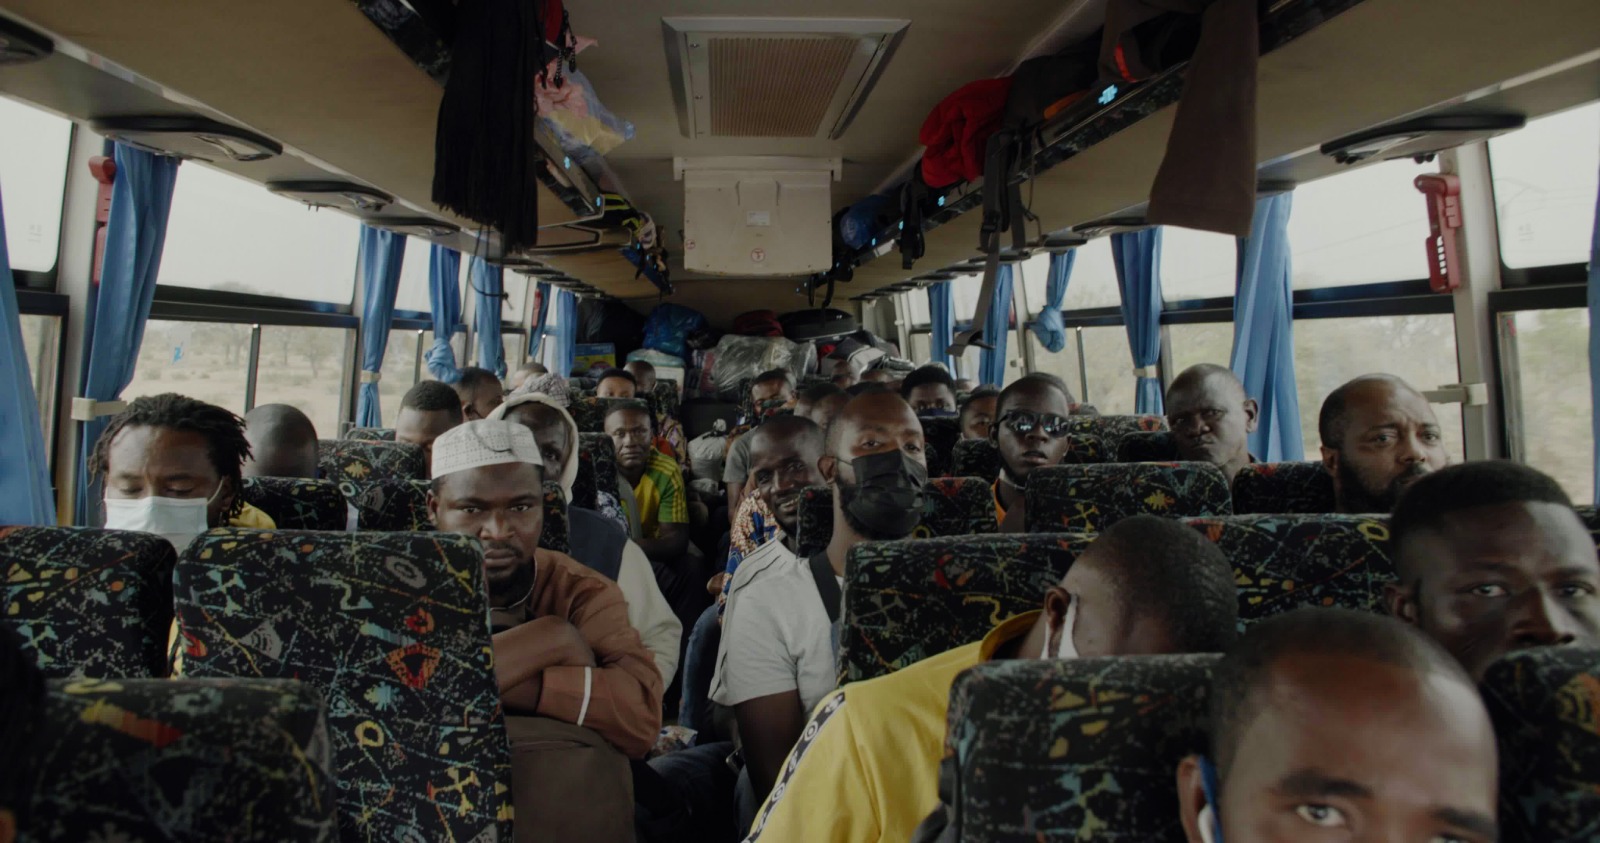 From the perspective of the front interior of a public transportation bus, a  group of African men are seated on a bus. From Ike Nnaebue's 'No U-Turn.' Courtesy of STEPS